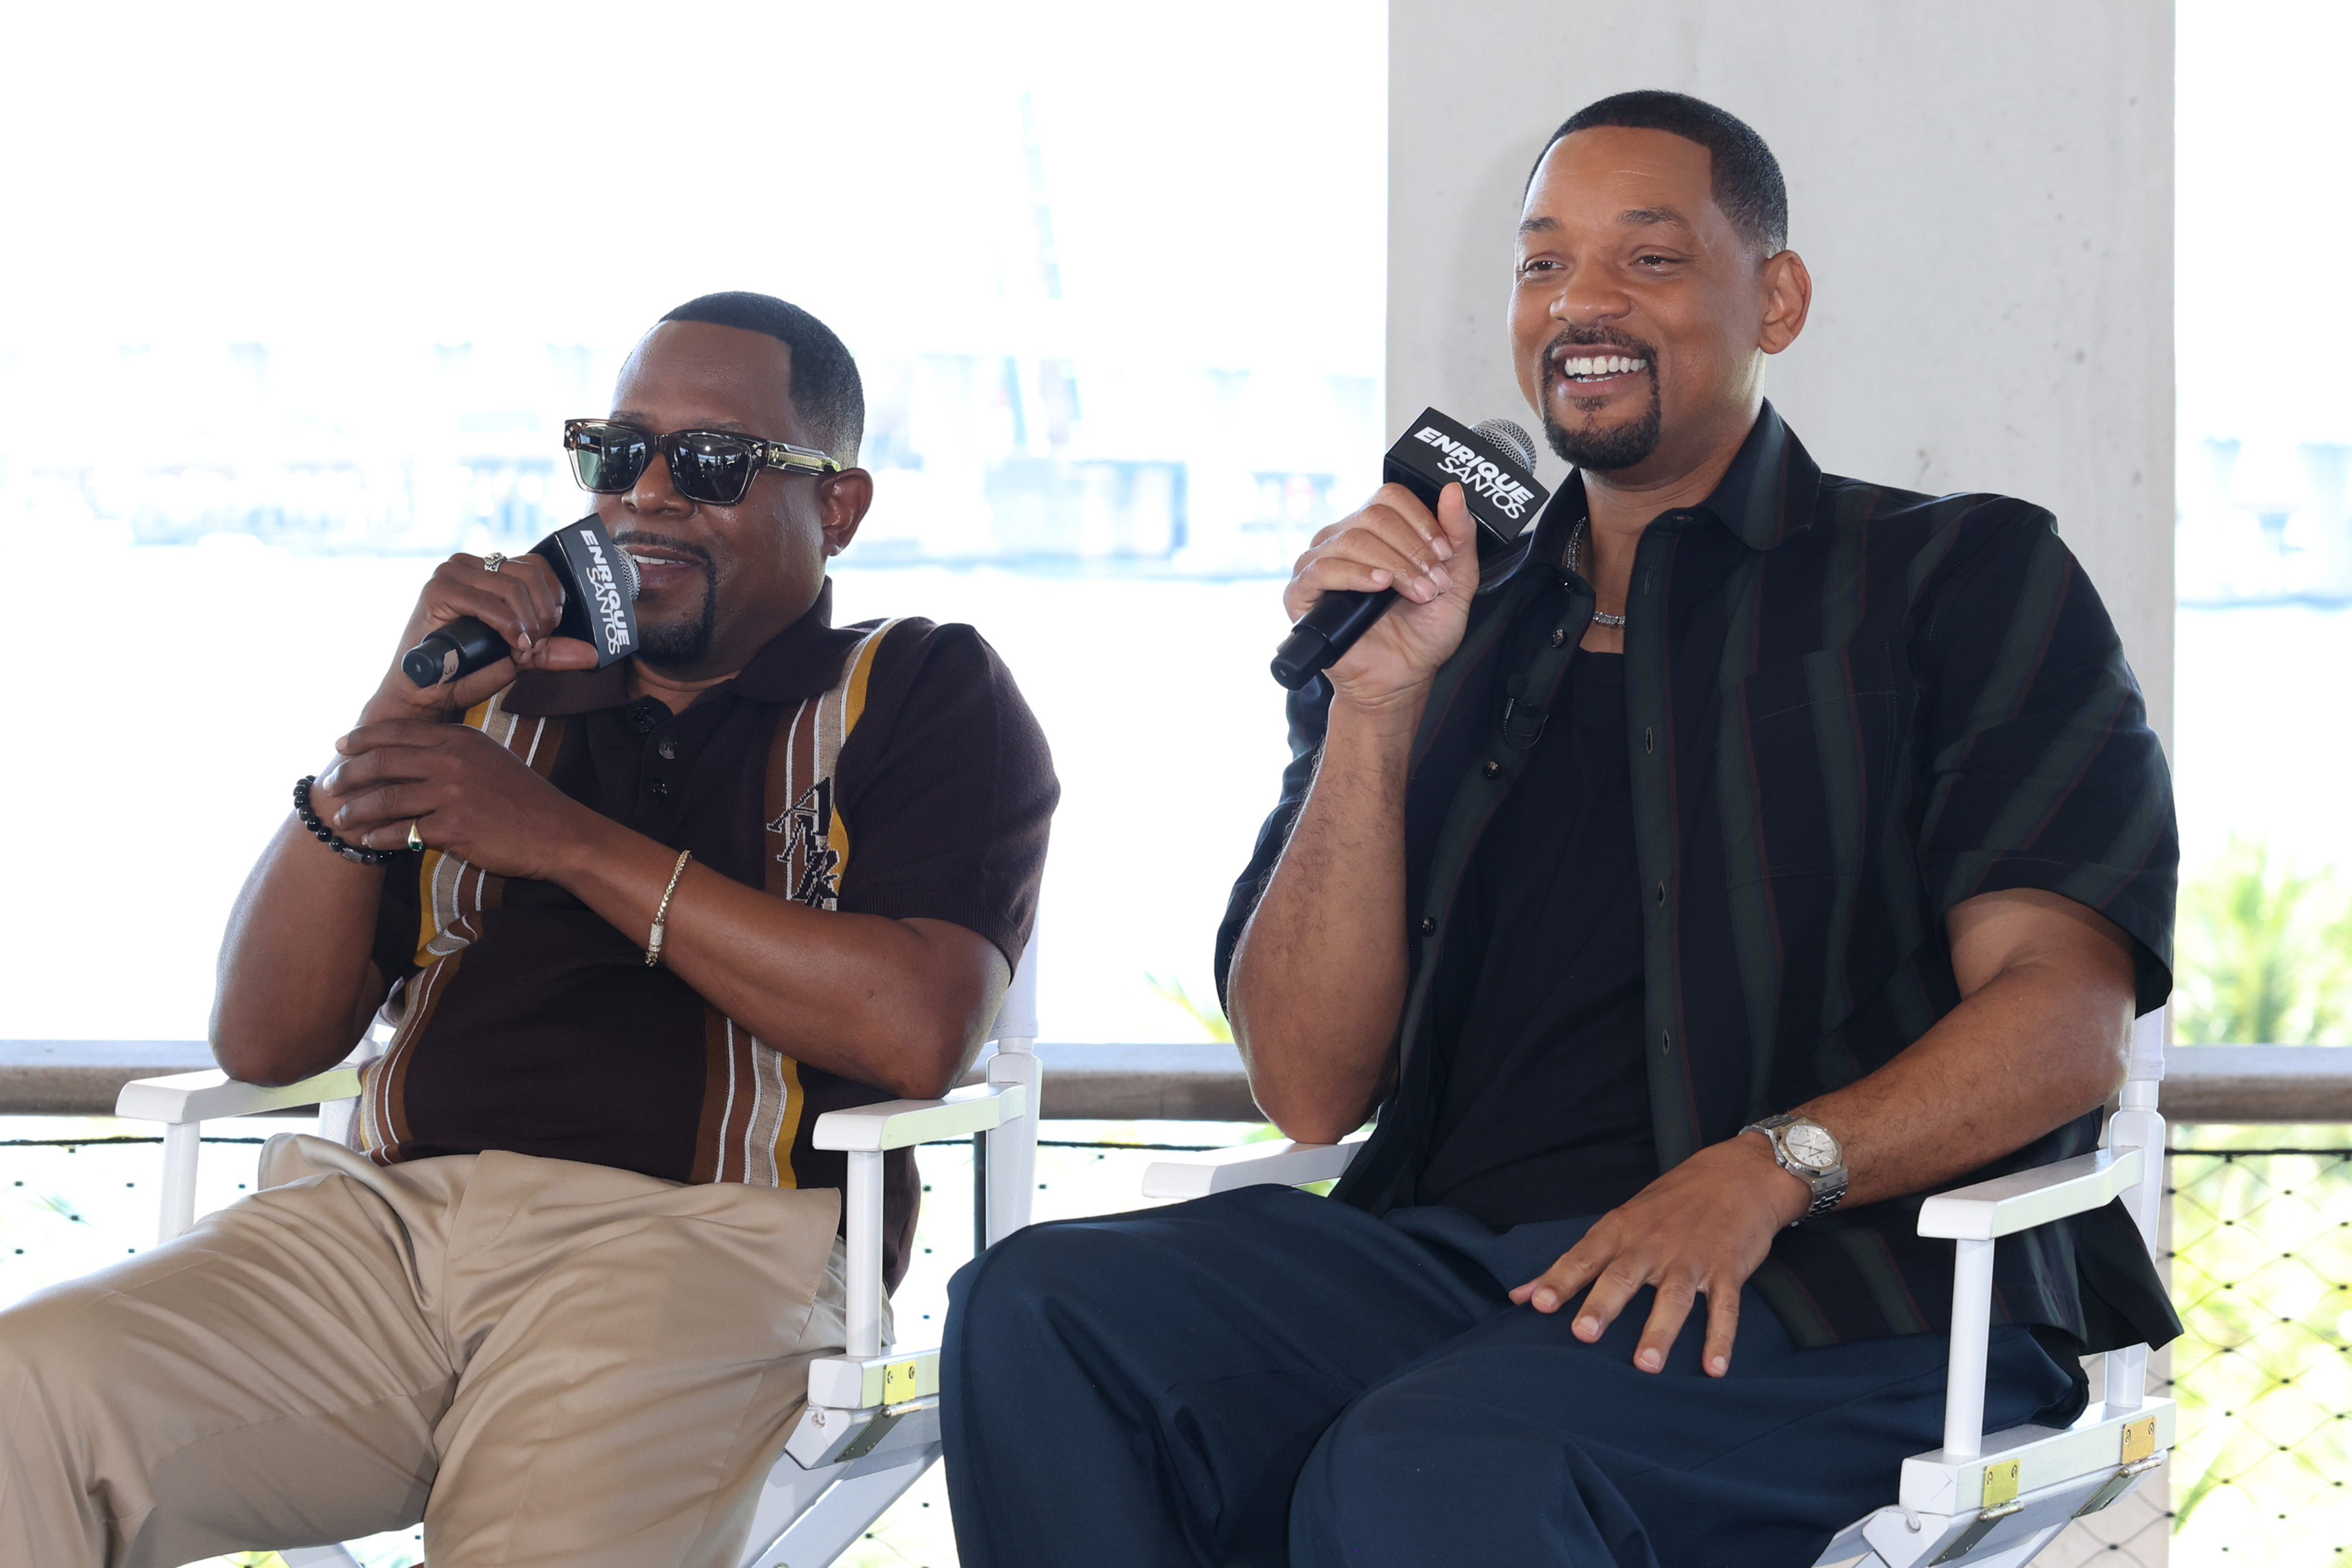 Martin Lawrence and Will Smith sit on director&#x27;s chairs, holding microphones and smiling during an interview